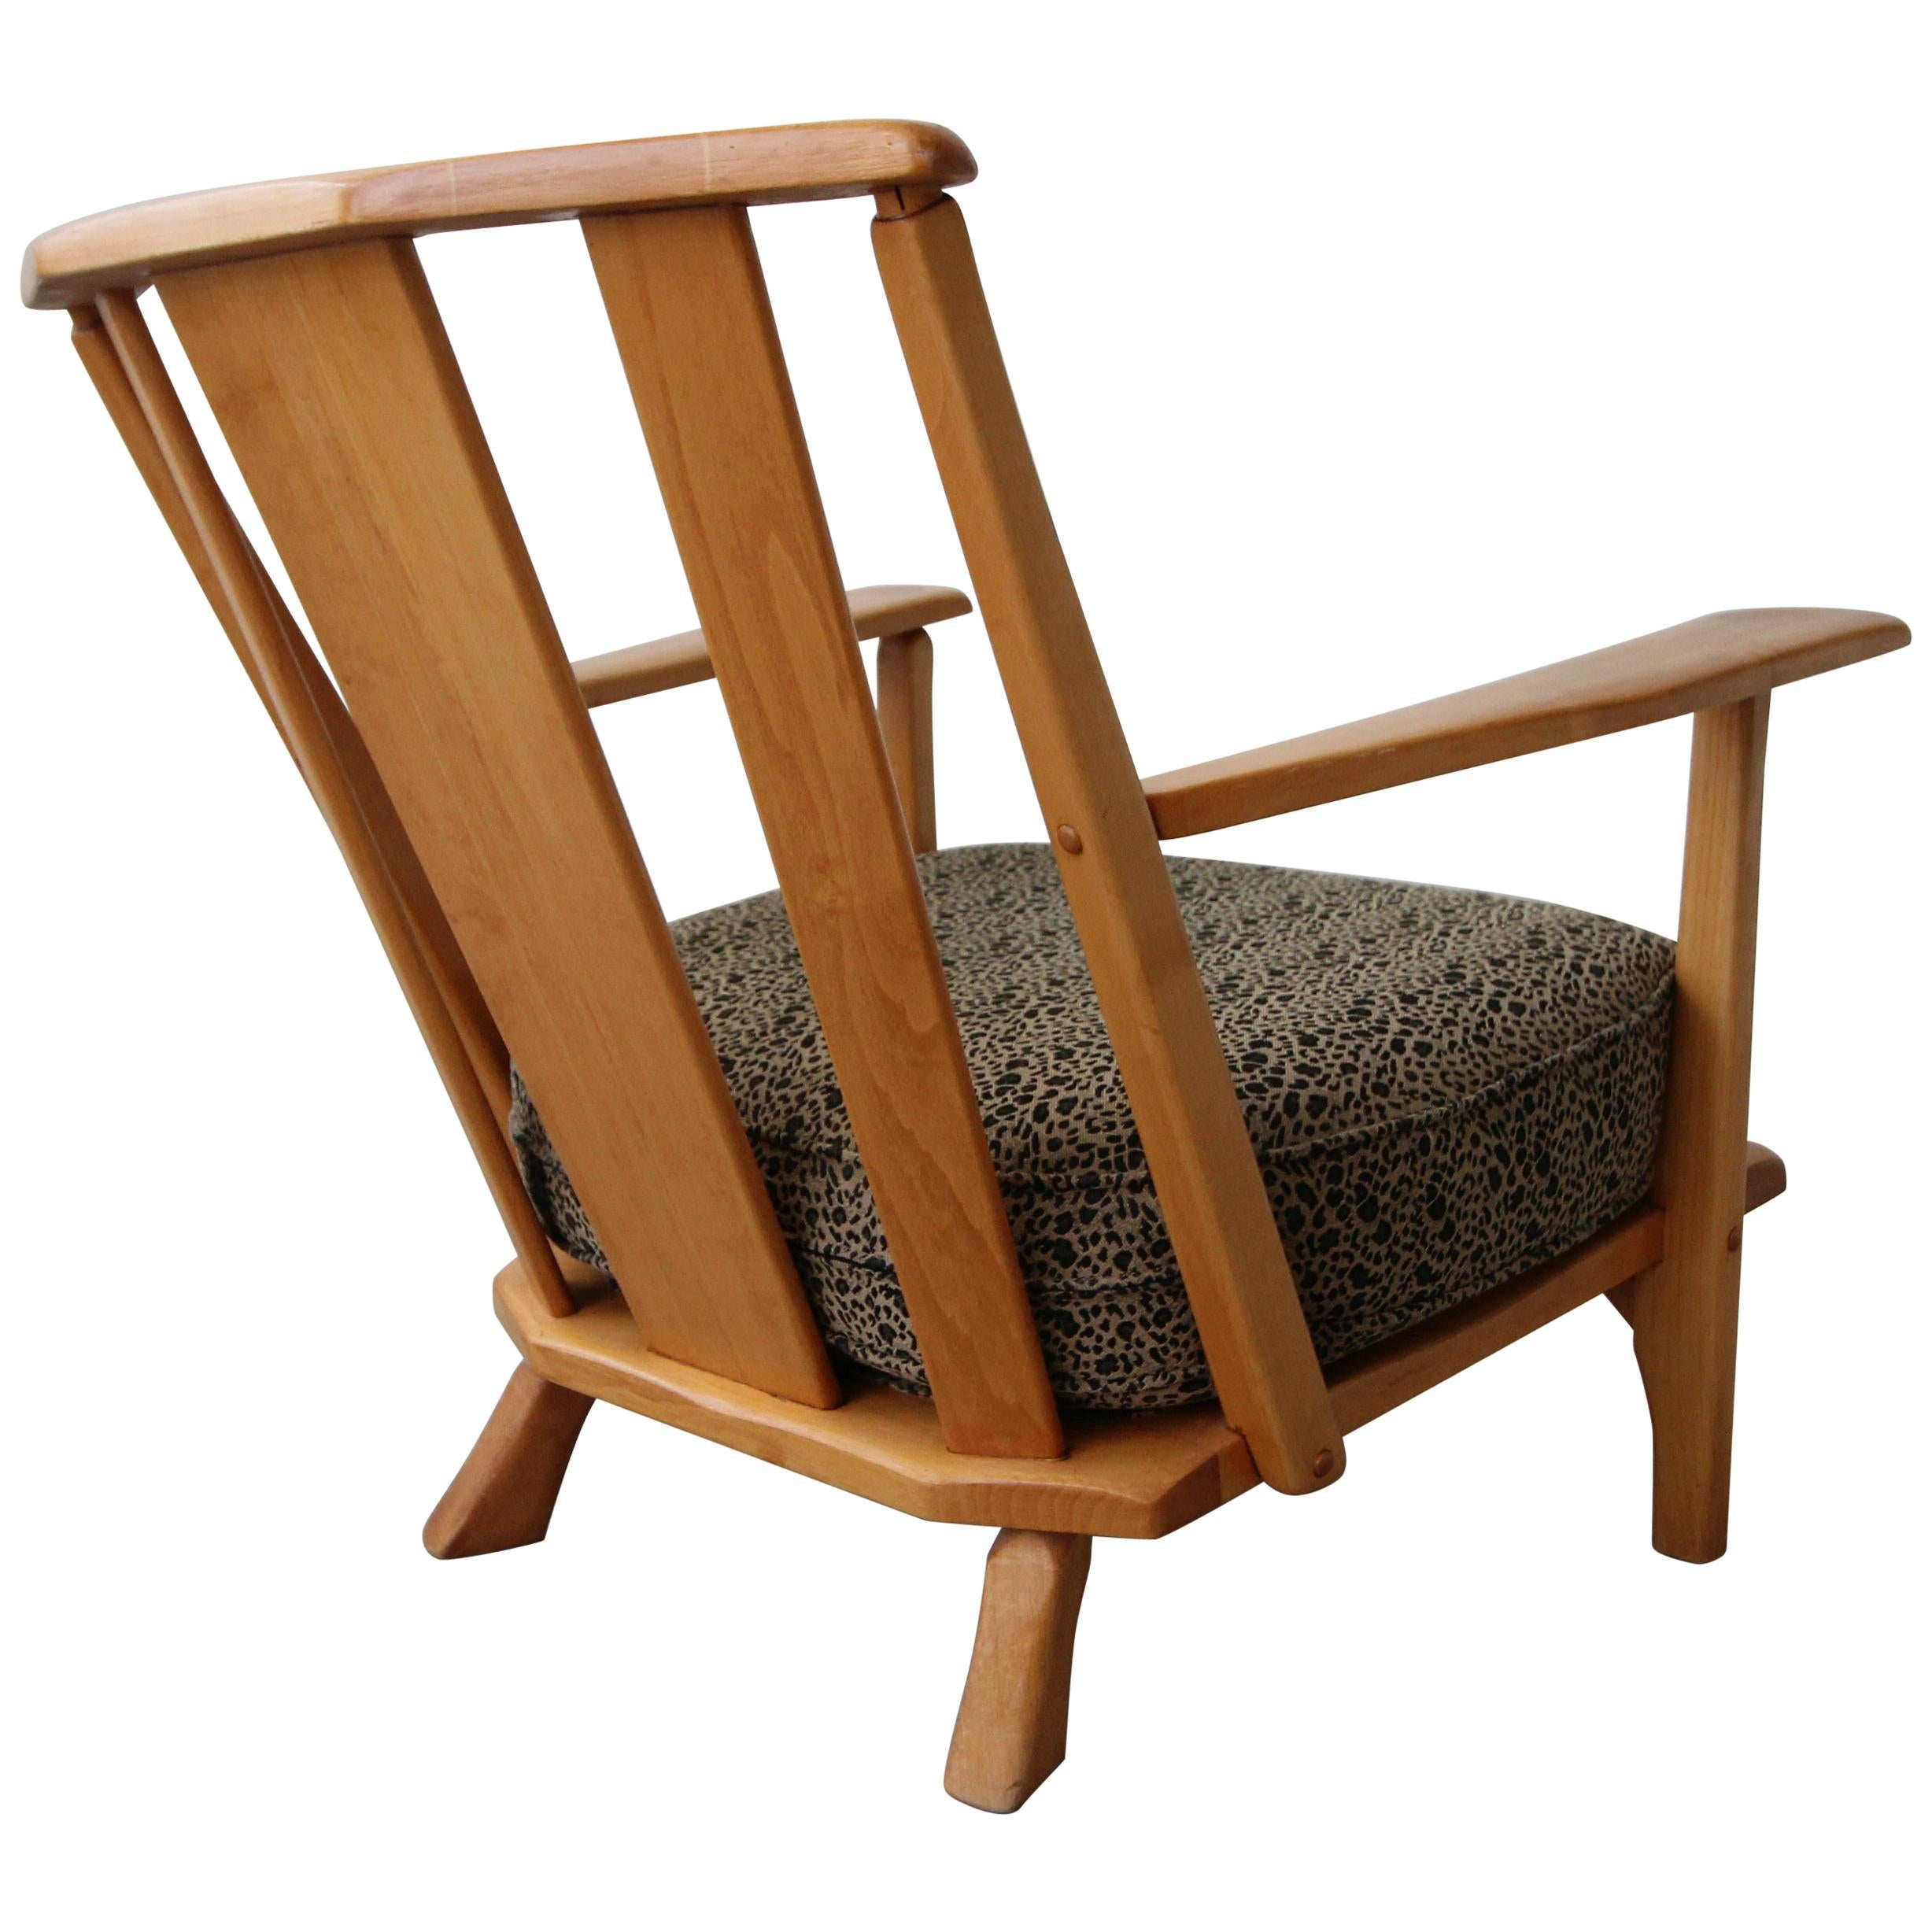 Early Midcentury Craftsman Style Maple Lounge Chair